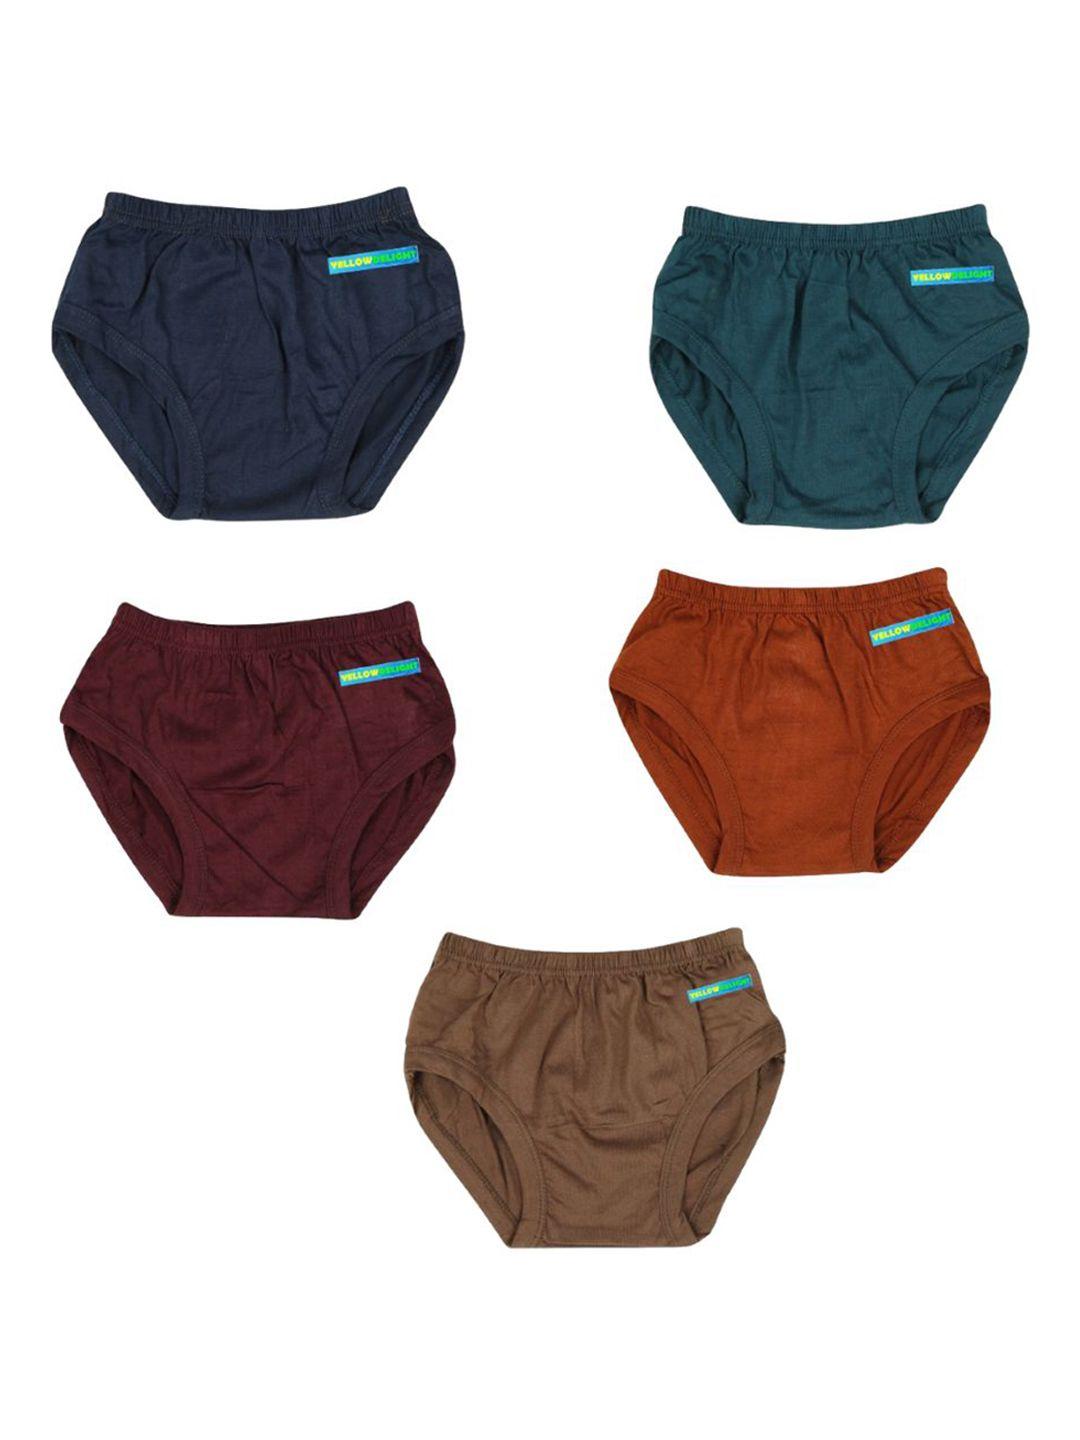 yellowdelight infant boys pack of 5 cotton hipster briefs yd 541 boys plain jetty 6-12 m-5